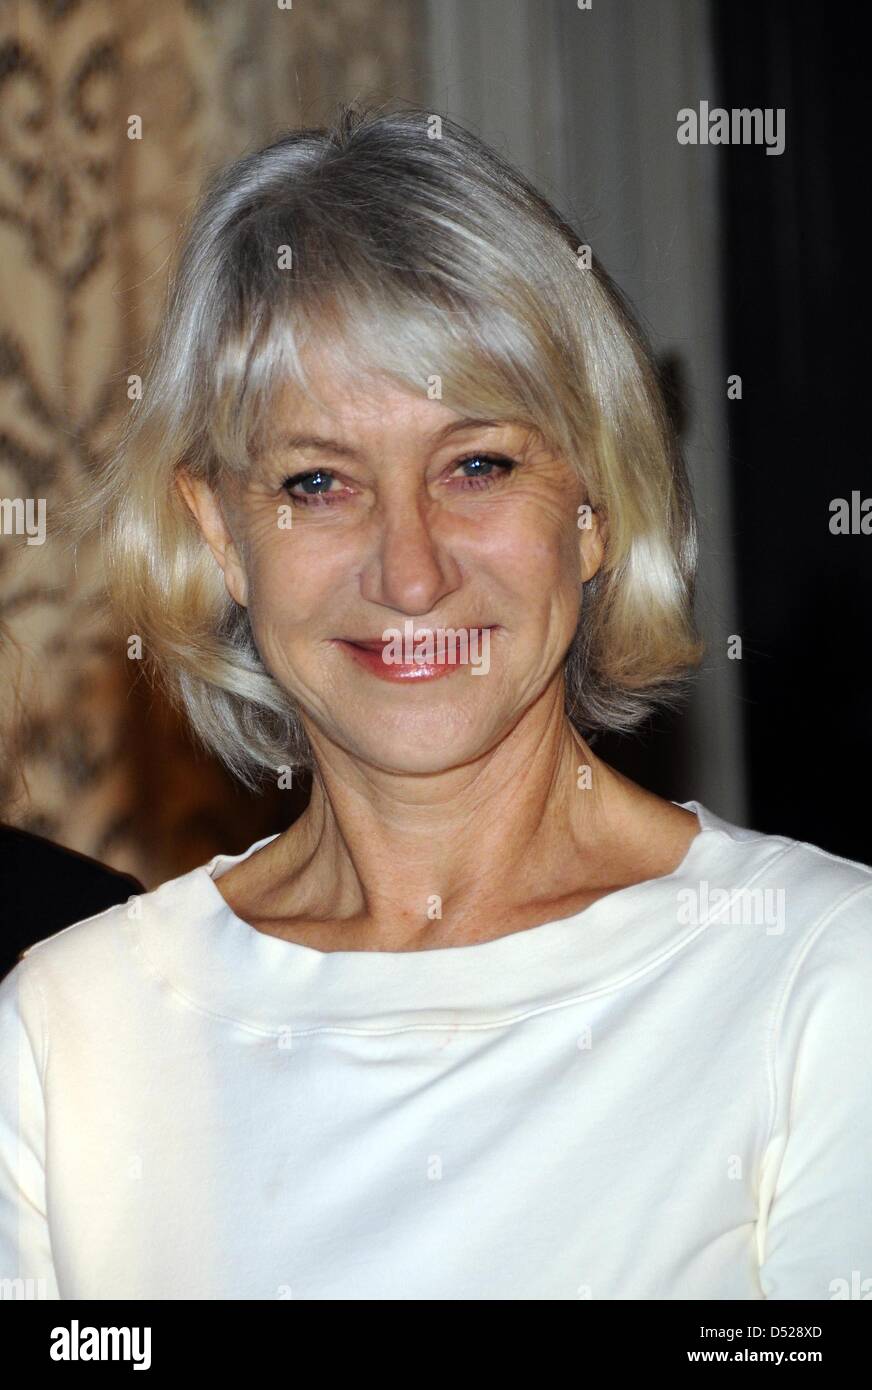 British actress Helen Mirren smiles during a photo call on the film 'The Door' in Cologne, Germany, 26 October 2010. The German-Hungarian co-production on the life of two women and their desire for mutual understanding is currently in production. Photo: Horst Galuschka Stock Photo